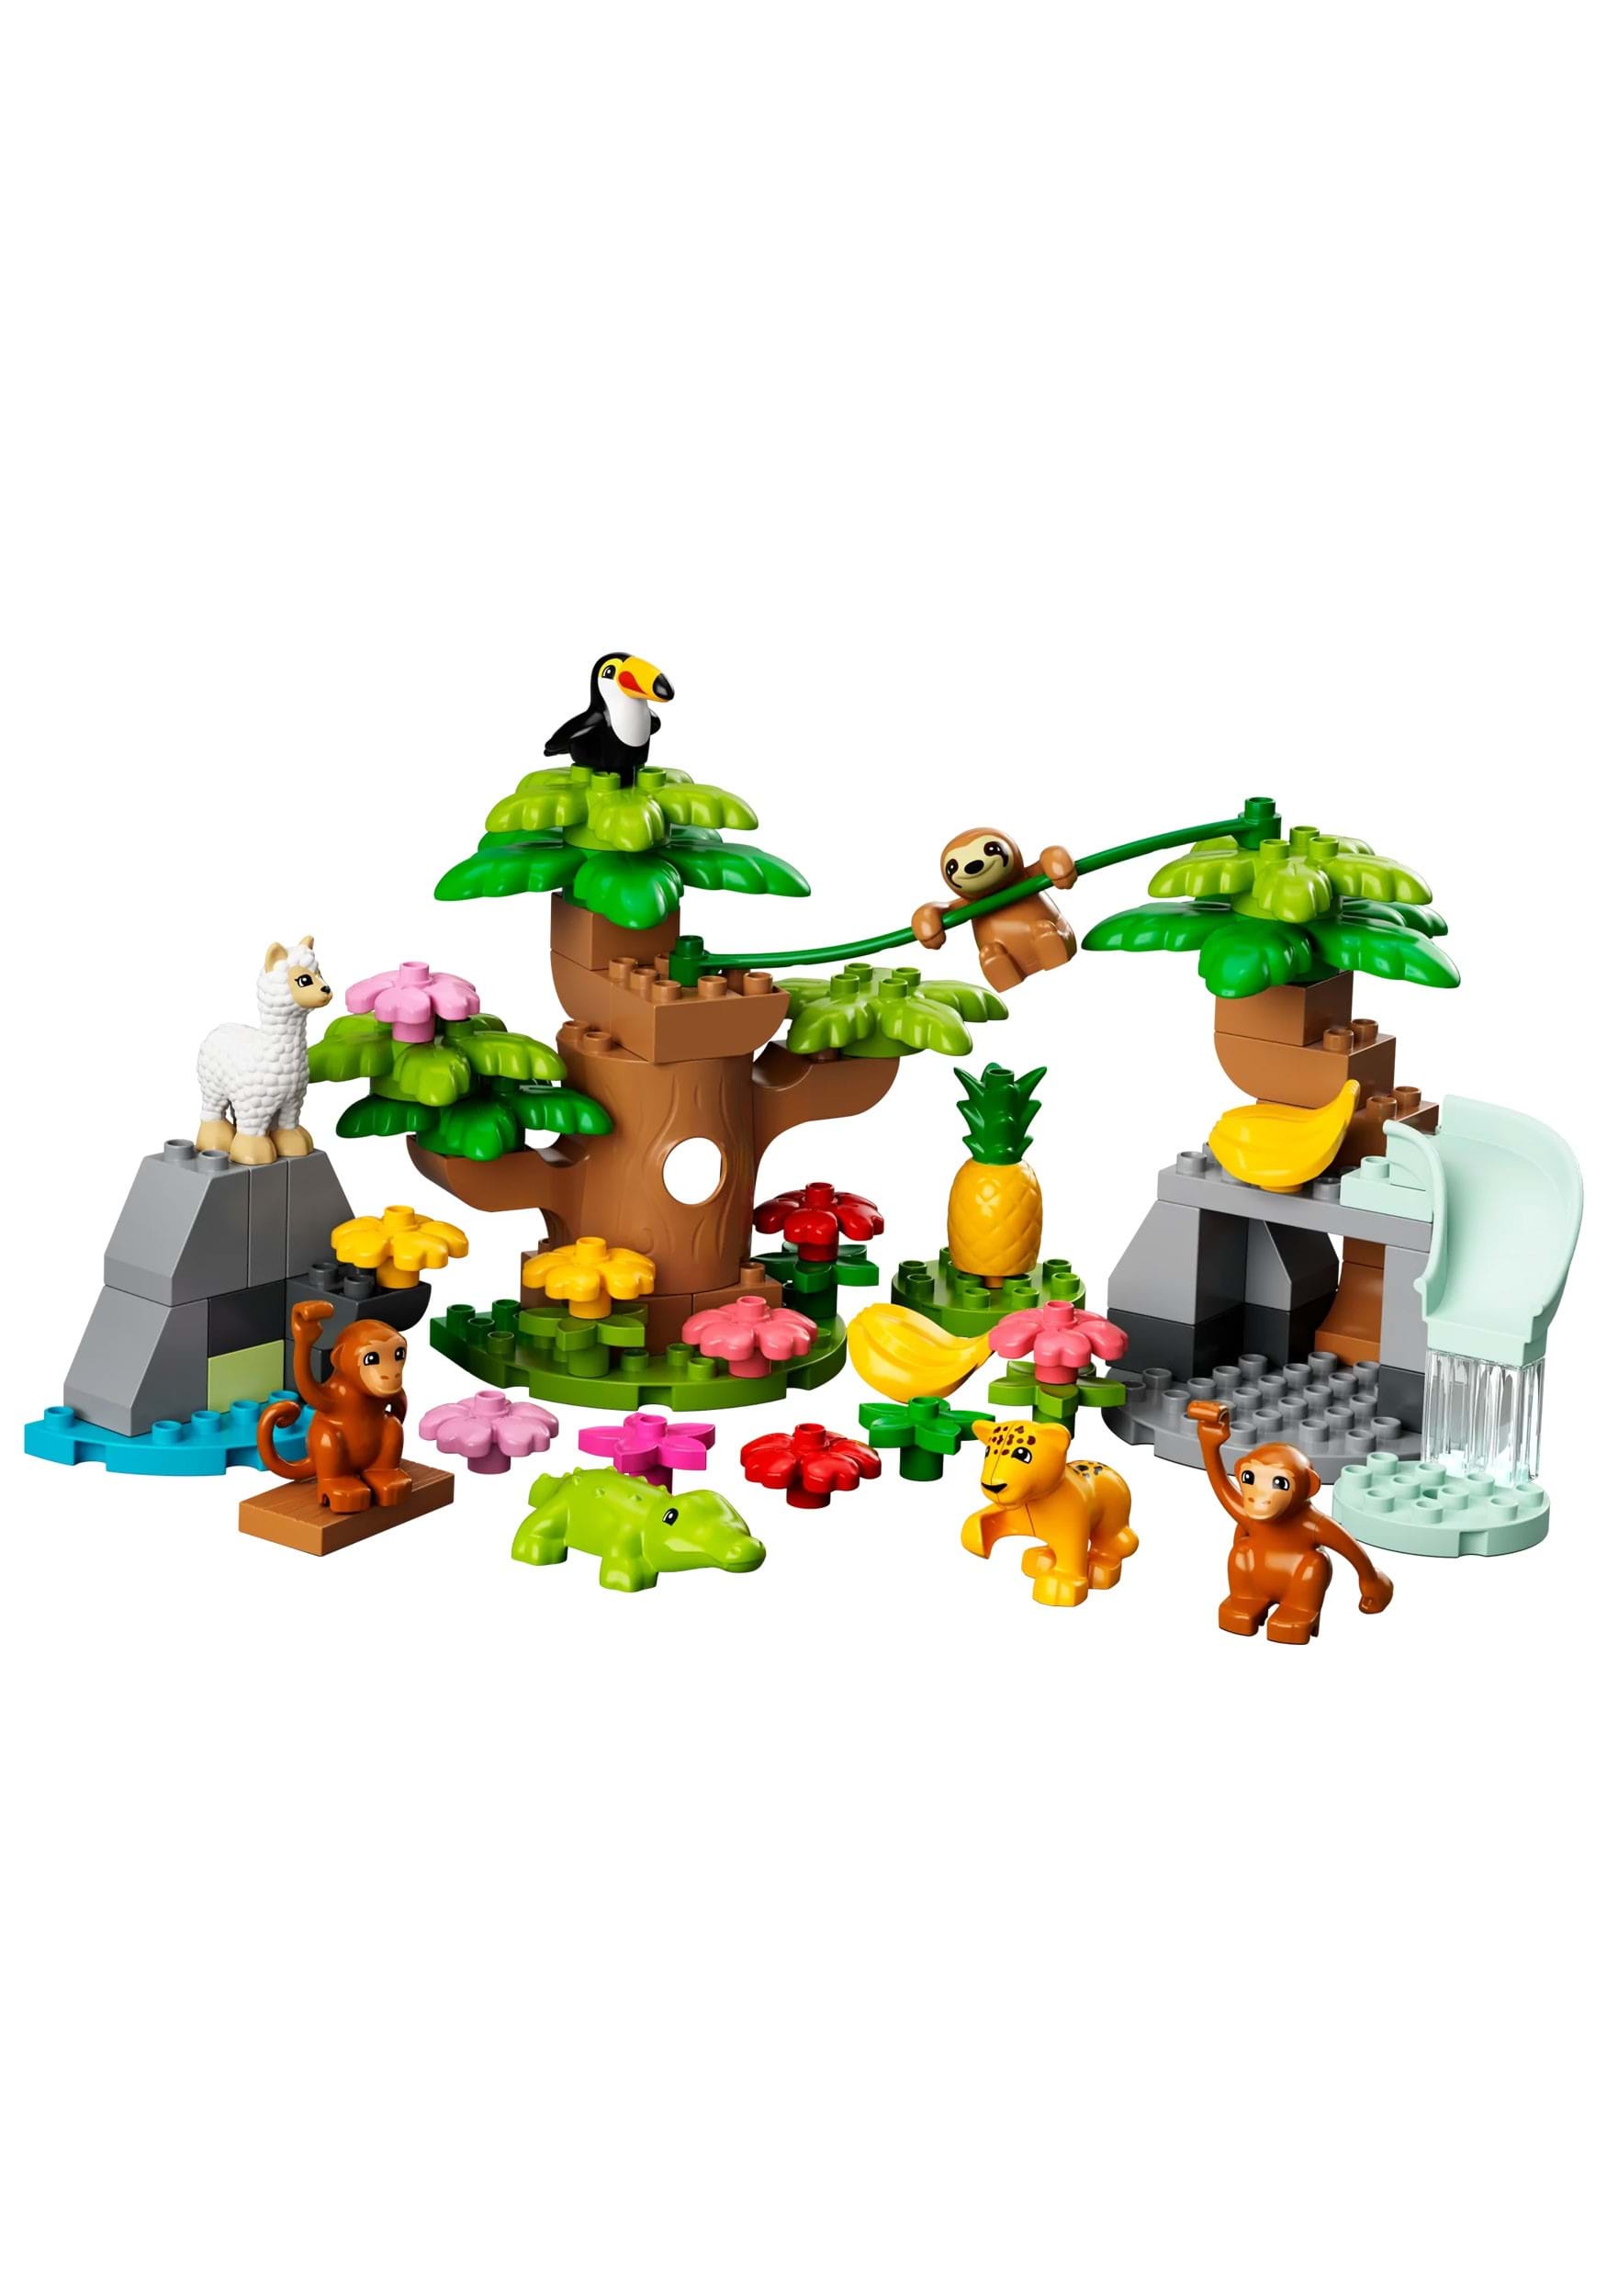 LEGO Duplo Wild Animals of South America Building Set for Kids